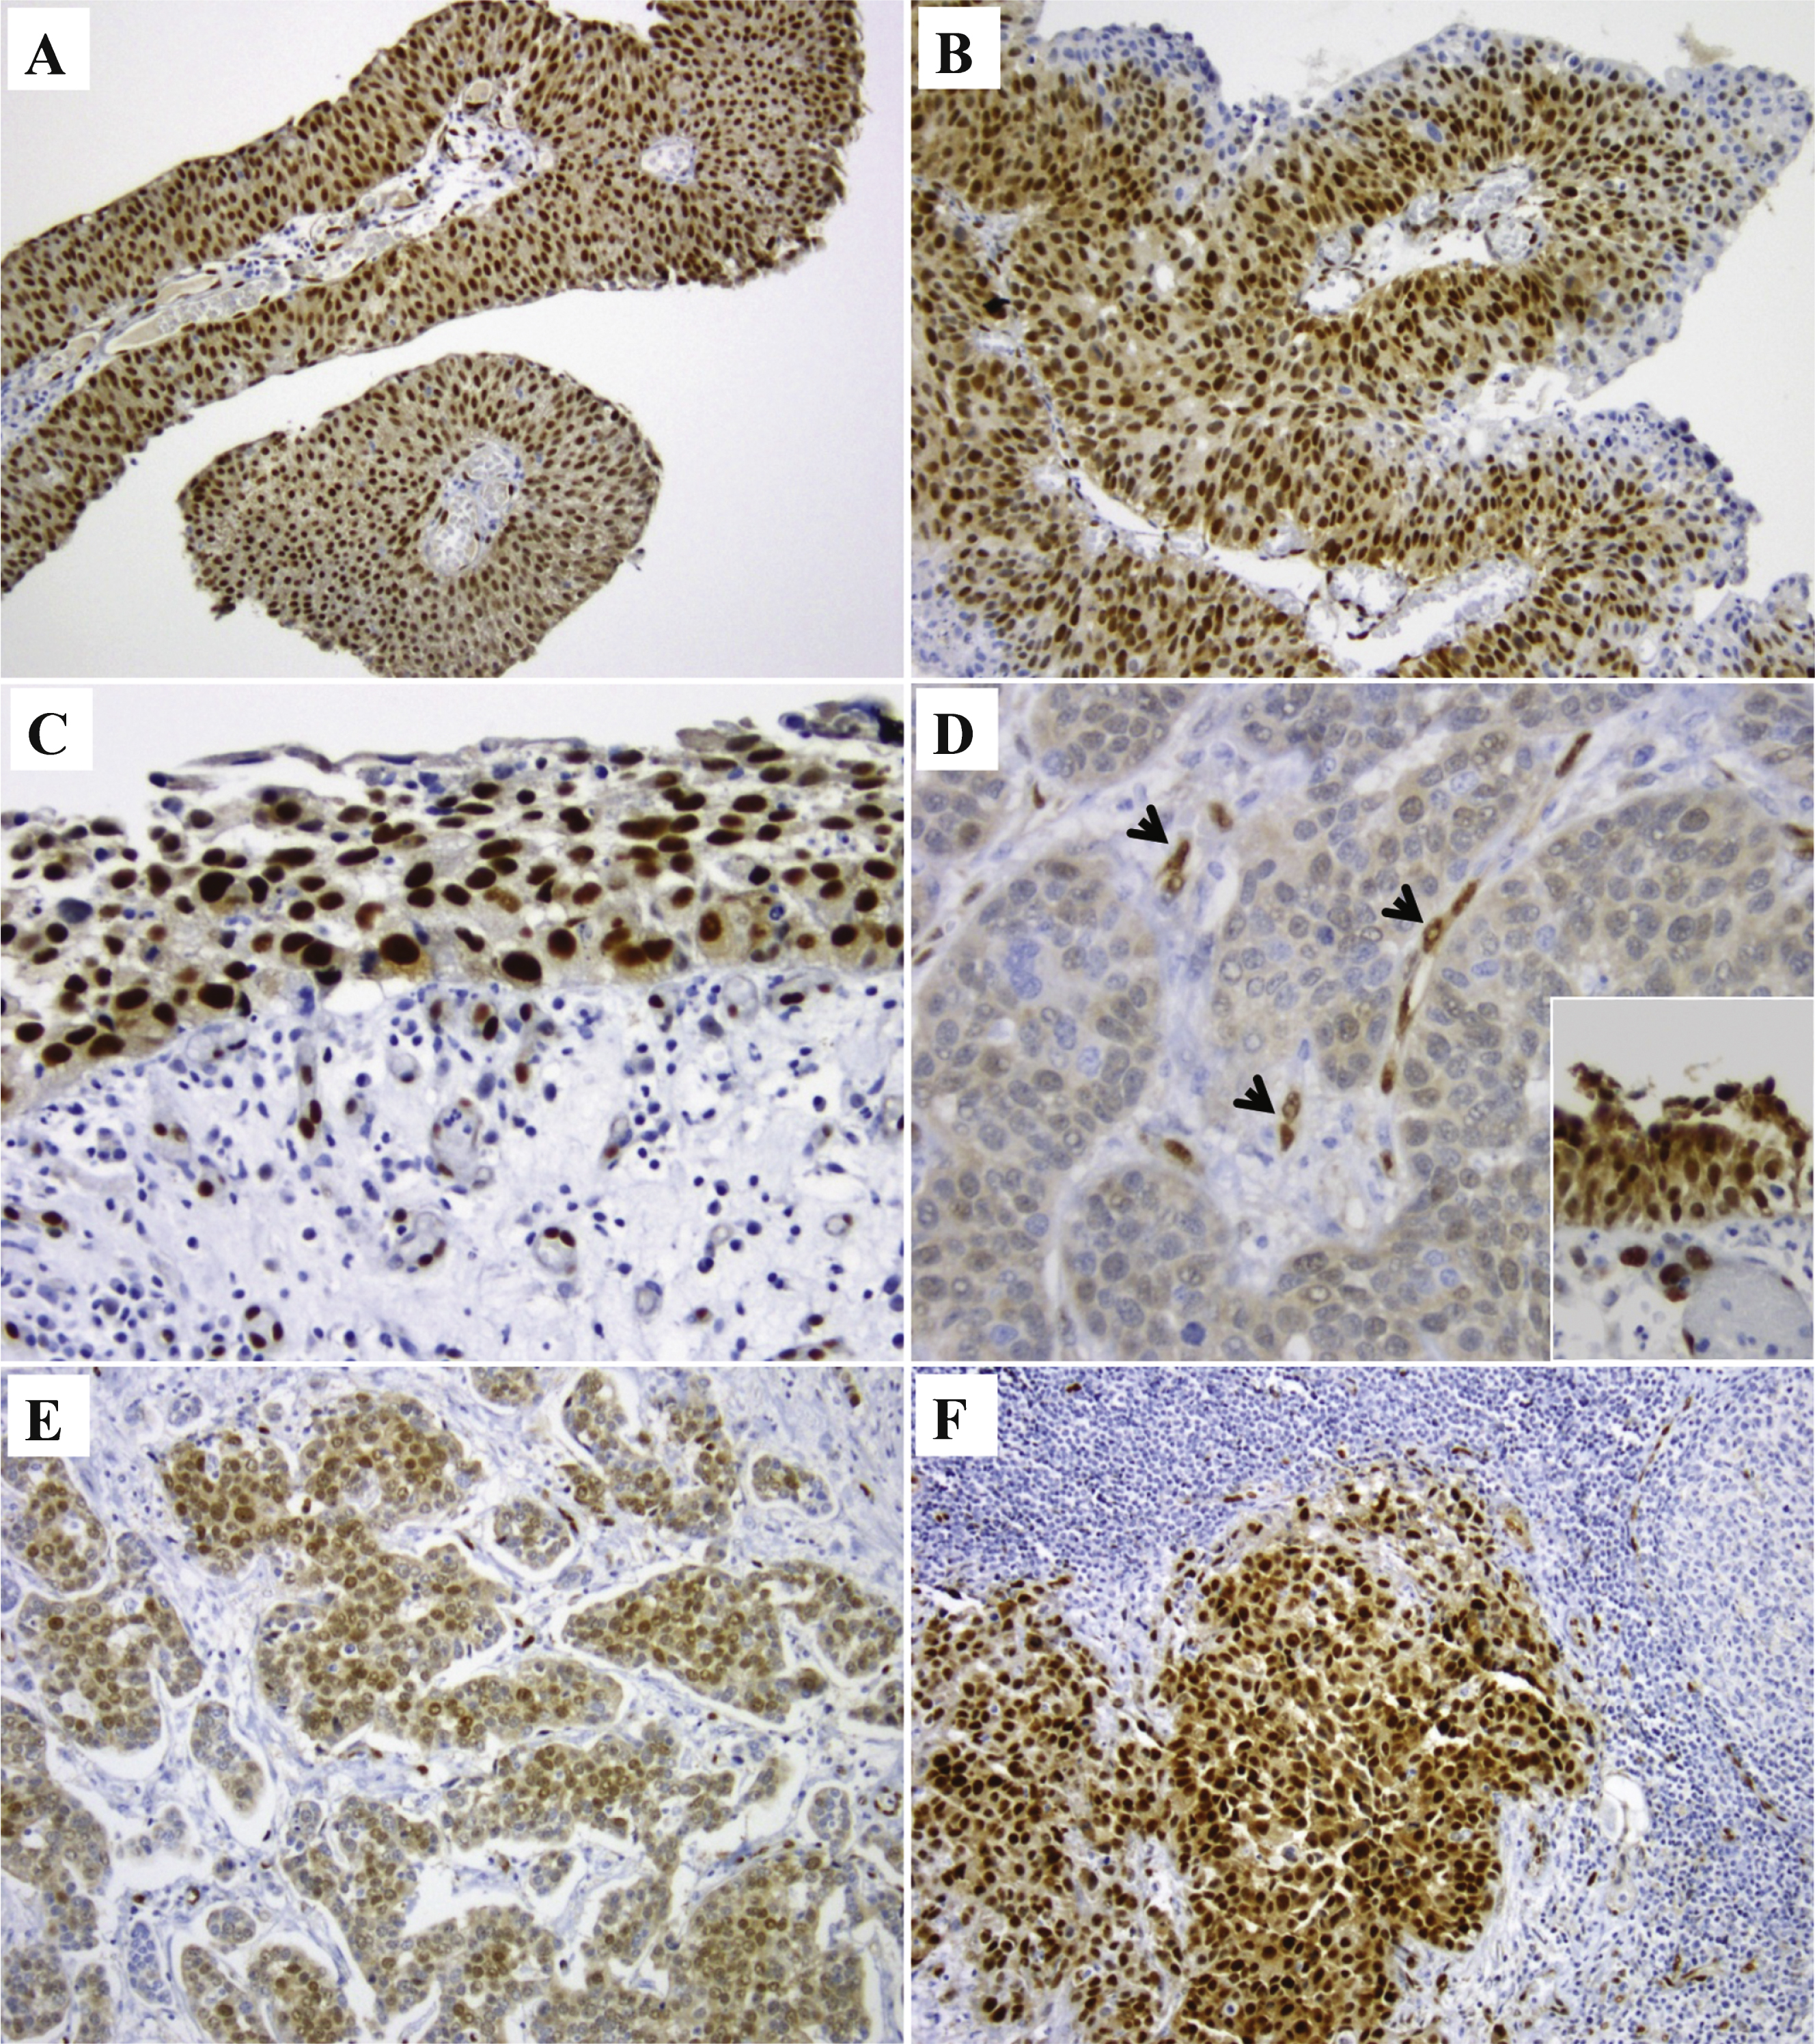 Id1 expression by immunohistochemistry in human samples. Positive expression in low grade papillary urothelial carcinoma (A); high grade papillary urothelial carcinoma (B); and urothelial carcinoma in situ (C). One sample of invasive urothelial carcinoma without Id1 expression (D, note Id1 expression in endothelial cells of tumor associated vasculature tumor [arrow heads] and Id1 protein expression in overlying normal urothelium [inset]). Id1 expression in invasive urothelial carcinoma (E) and matched lymph node metastasis (F).